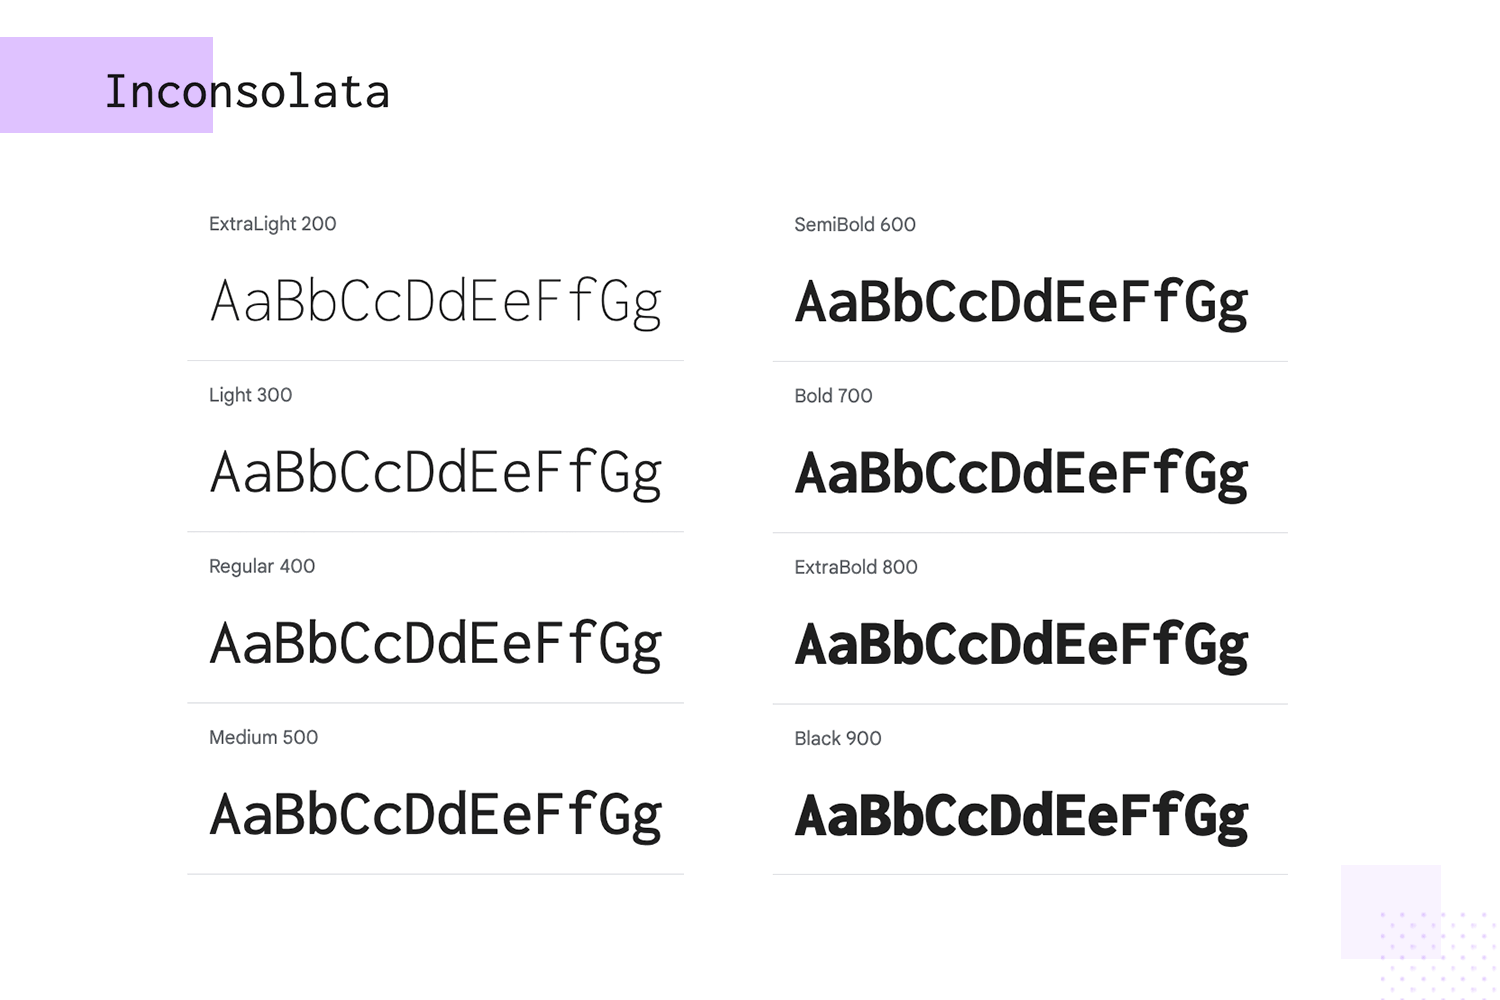 Inconsolata font showcase with weights from ExtraLight 200 to Black 900.